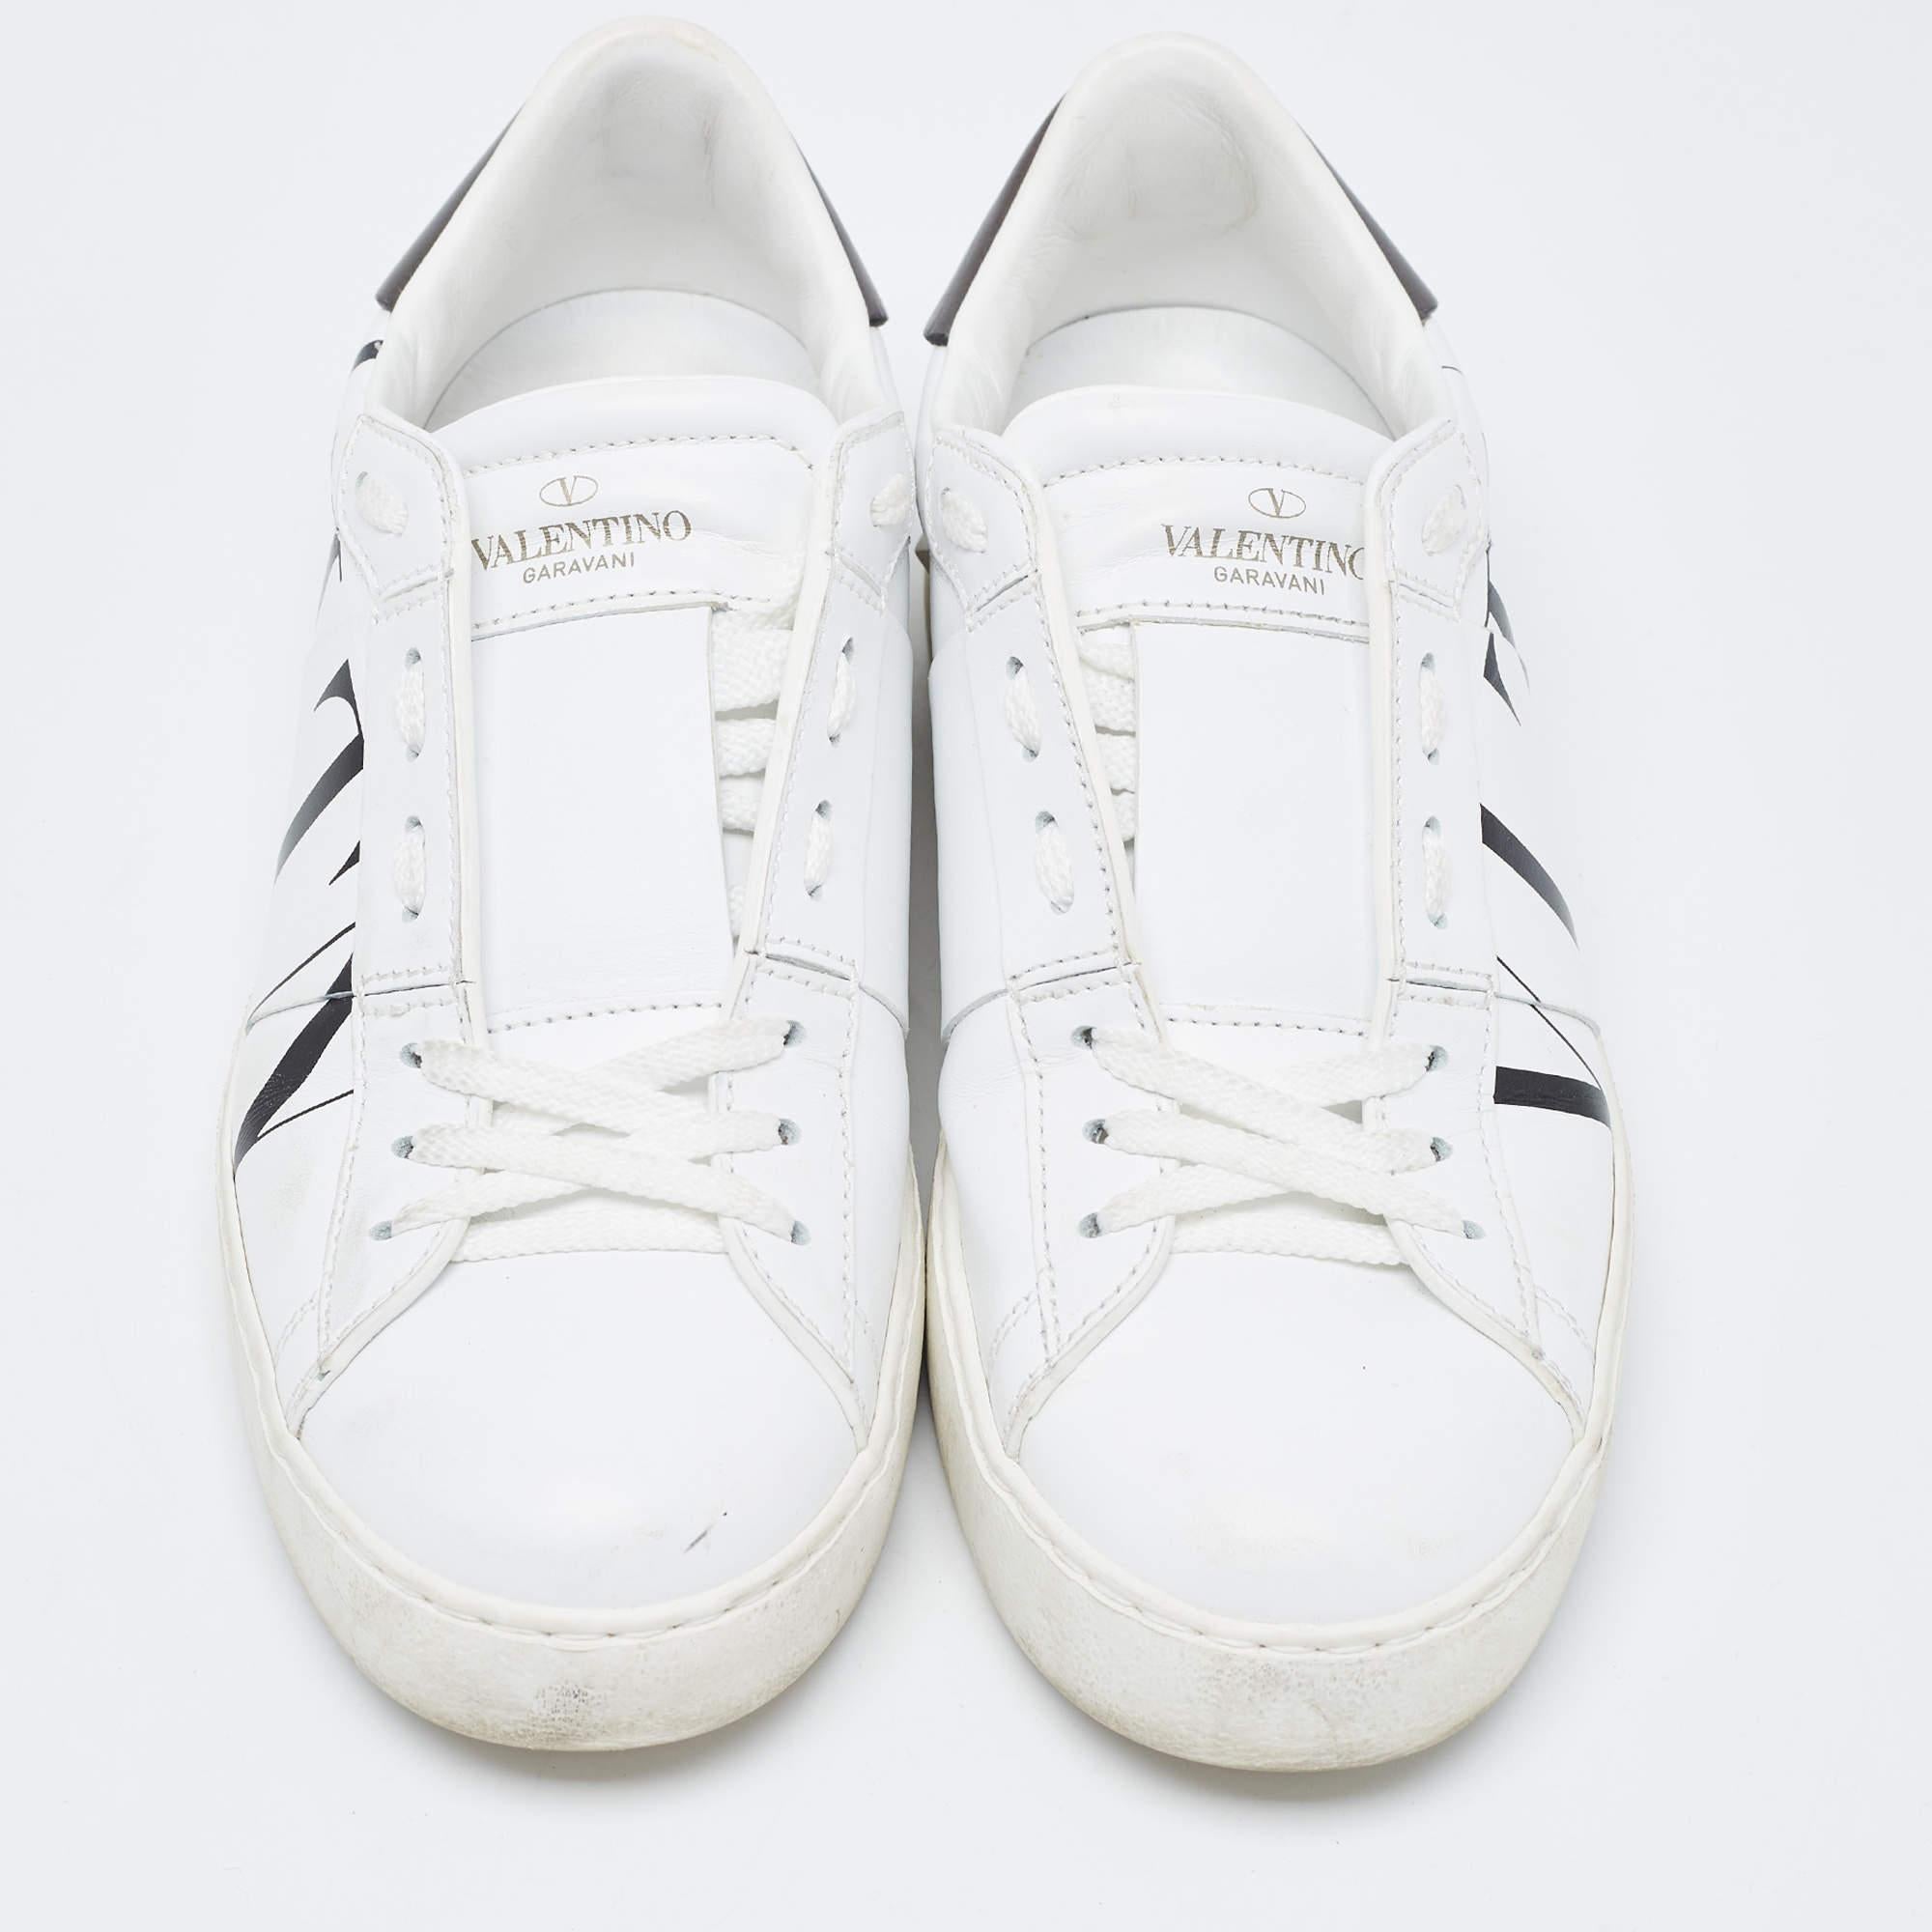 Packed with style and comfort, these Valentino white sneakers are gentle on the feet so that you can glide through the day. They have a sleek upper with lace closure, and they're set on durable rubber soles.

